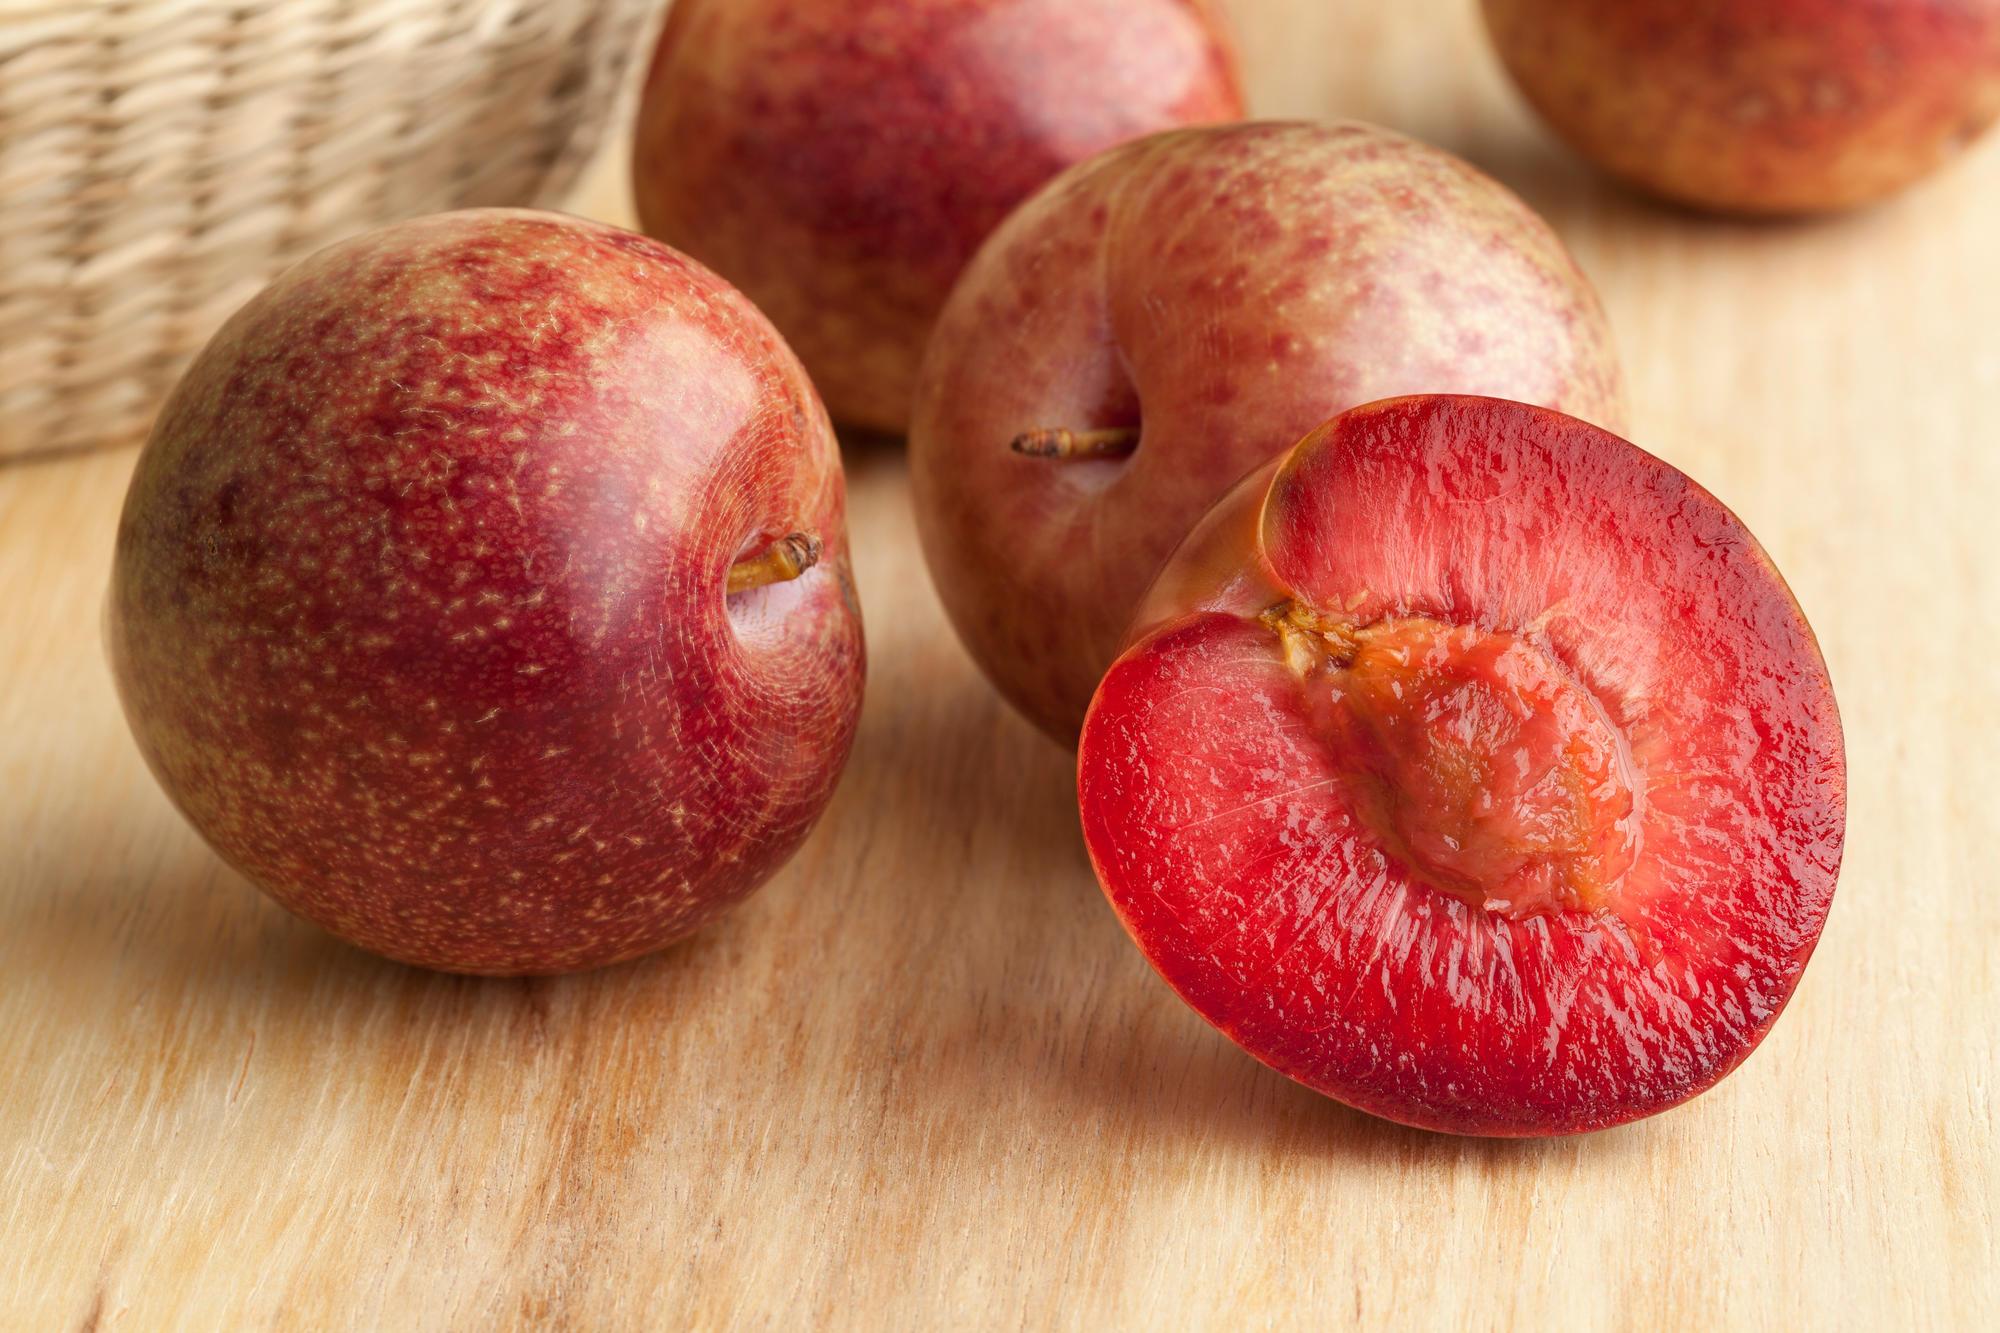 Pluot fruits on a wooden table. One of the fruits is cut in half to display the deep red flesh and the pit.